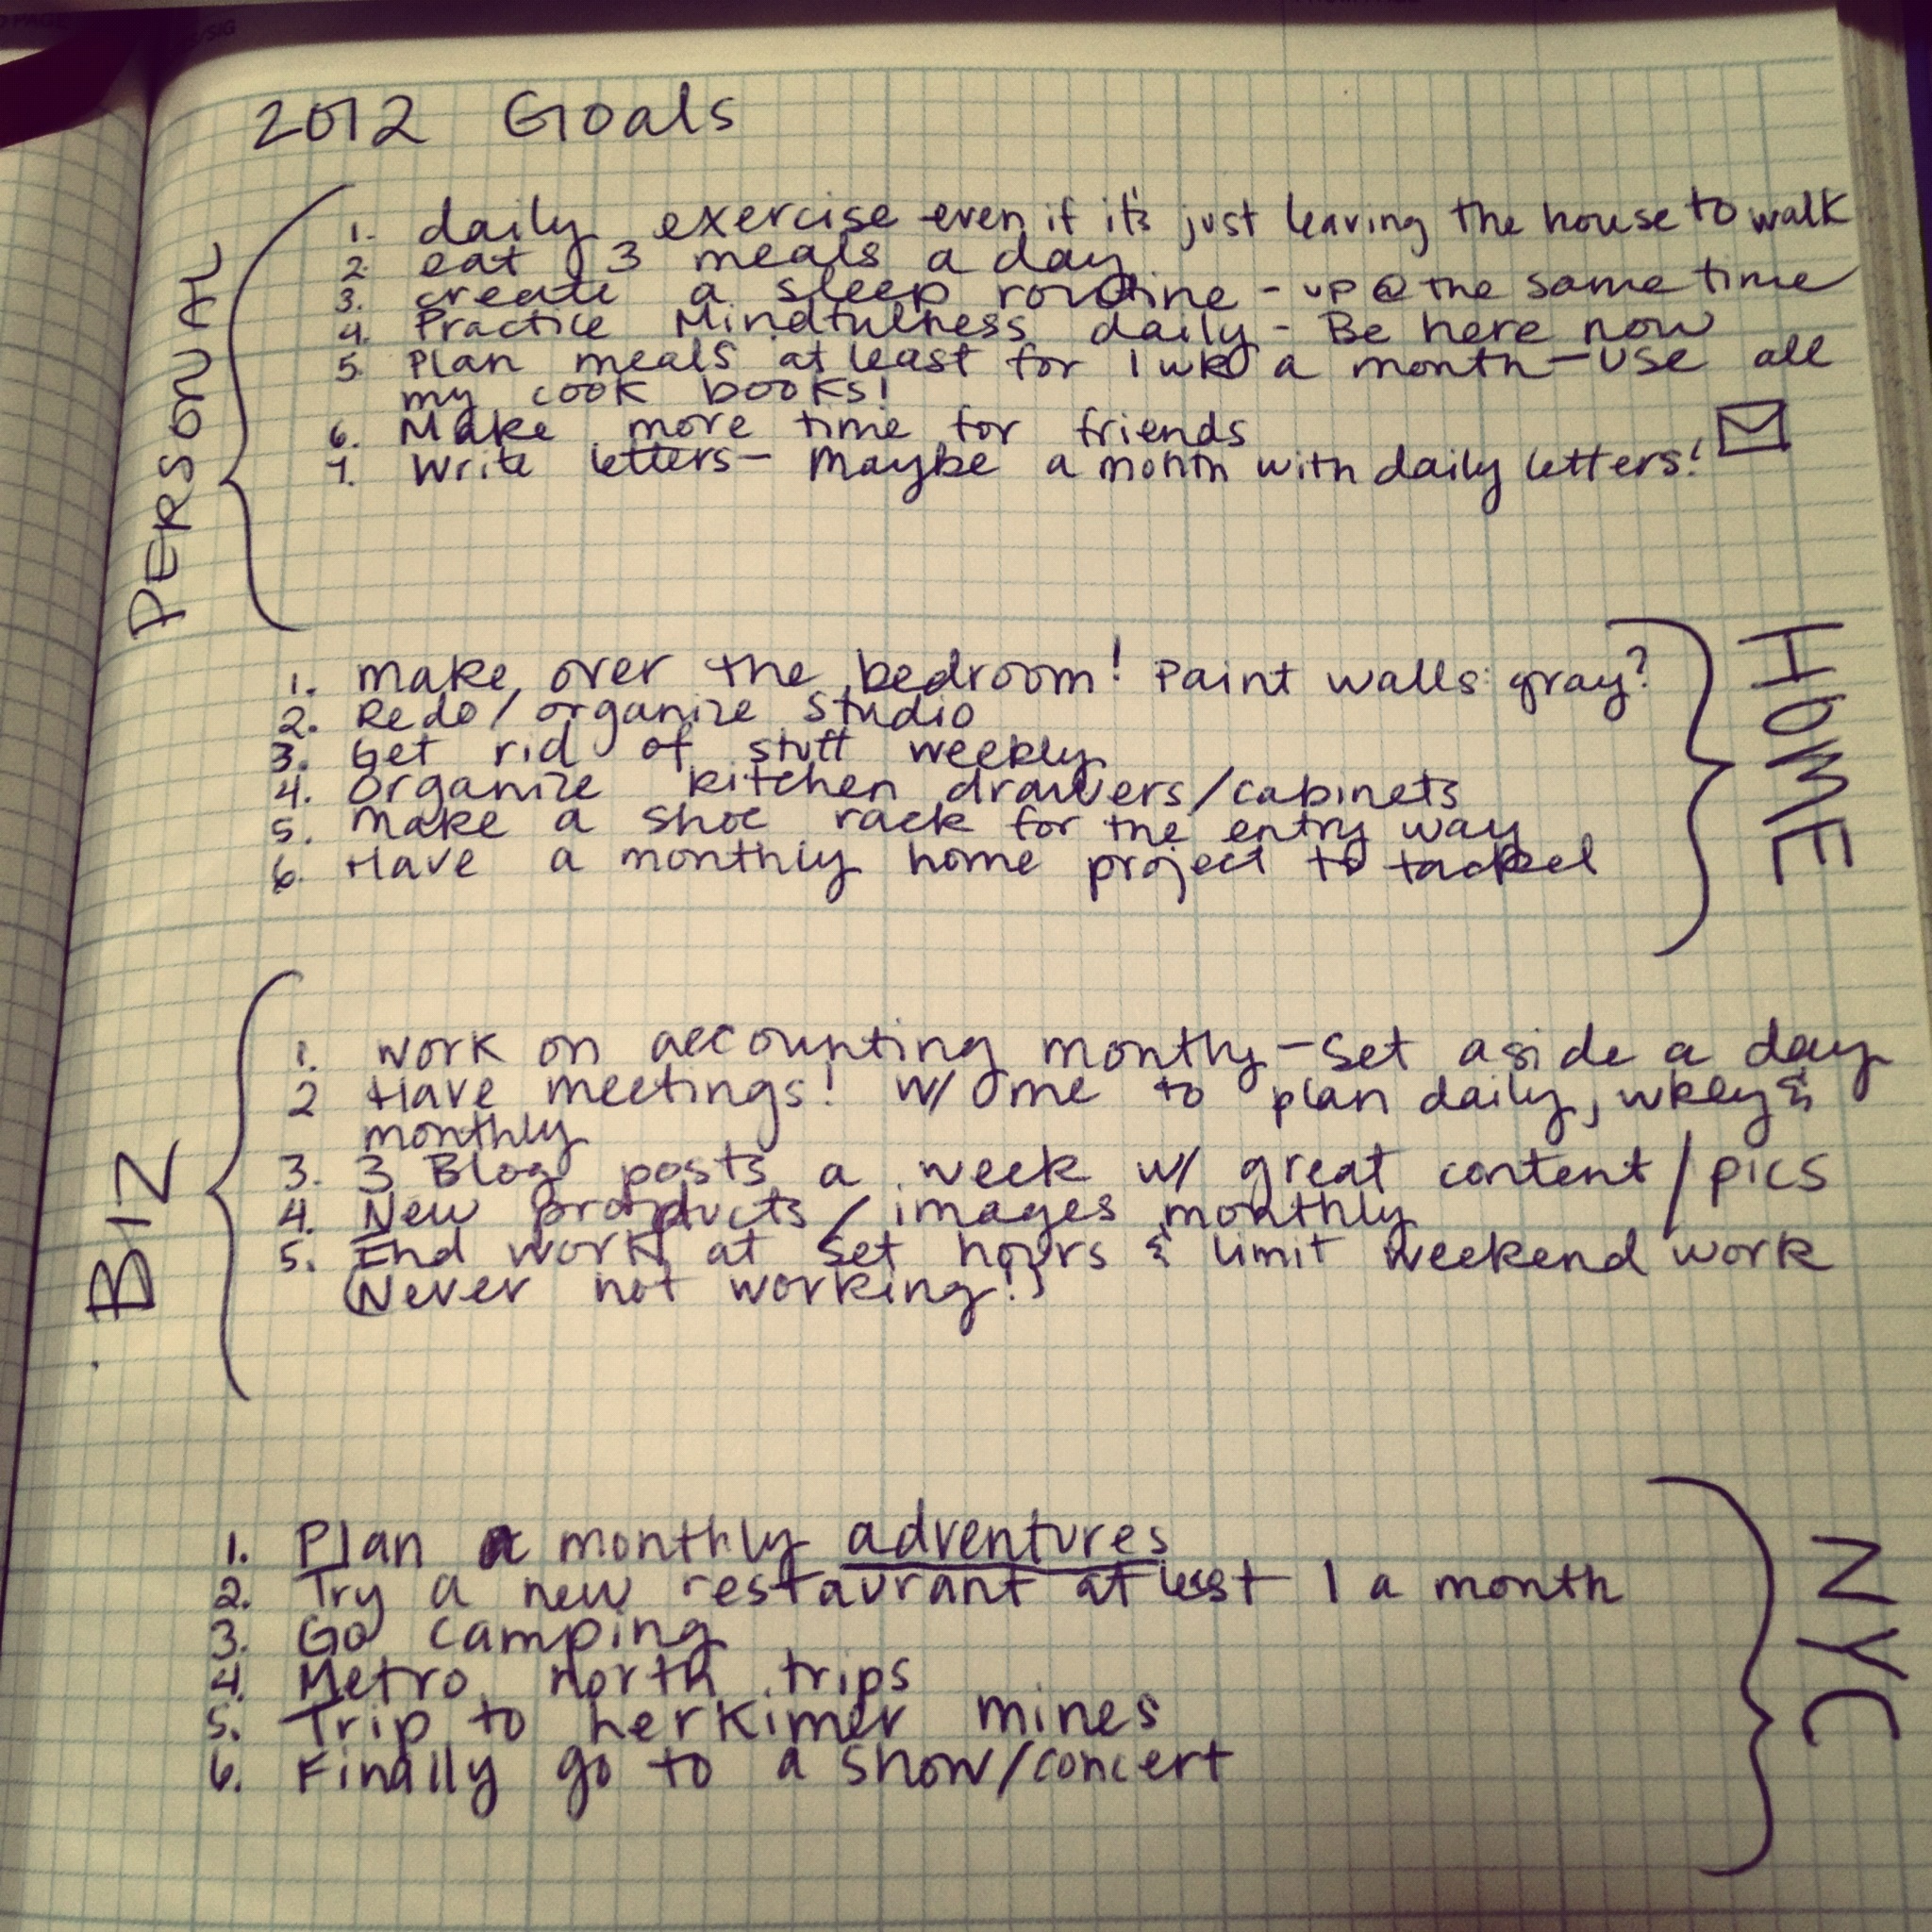 Making a goal list for 2012...